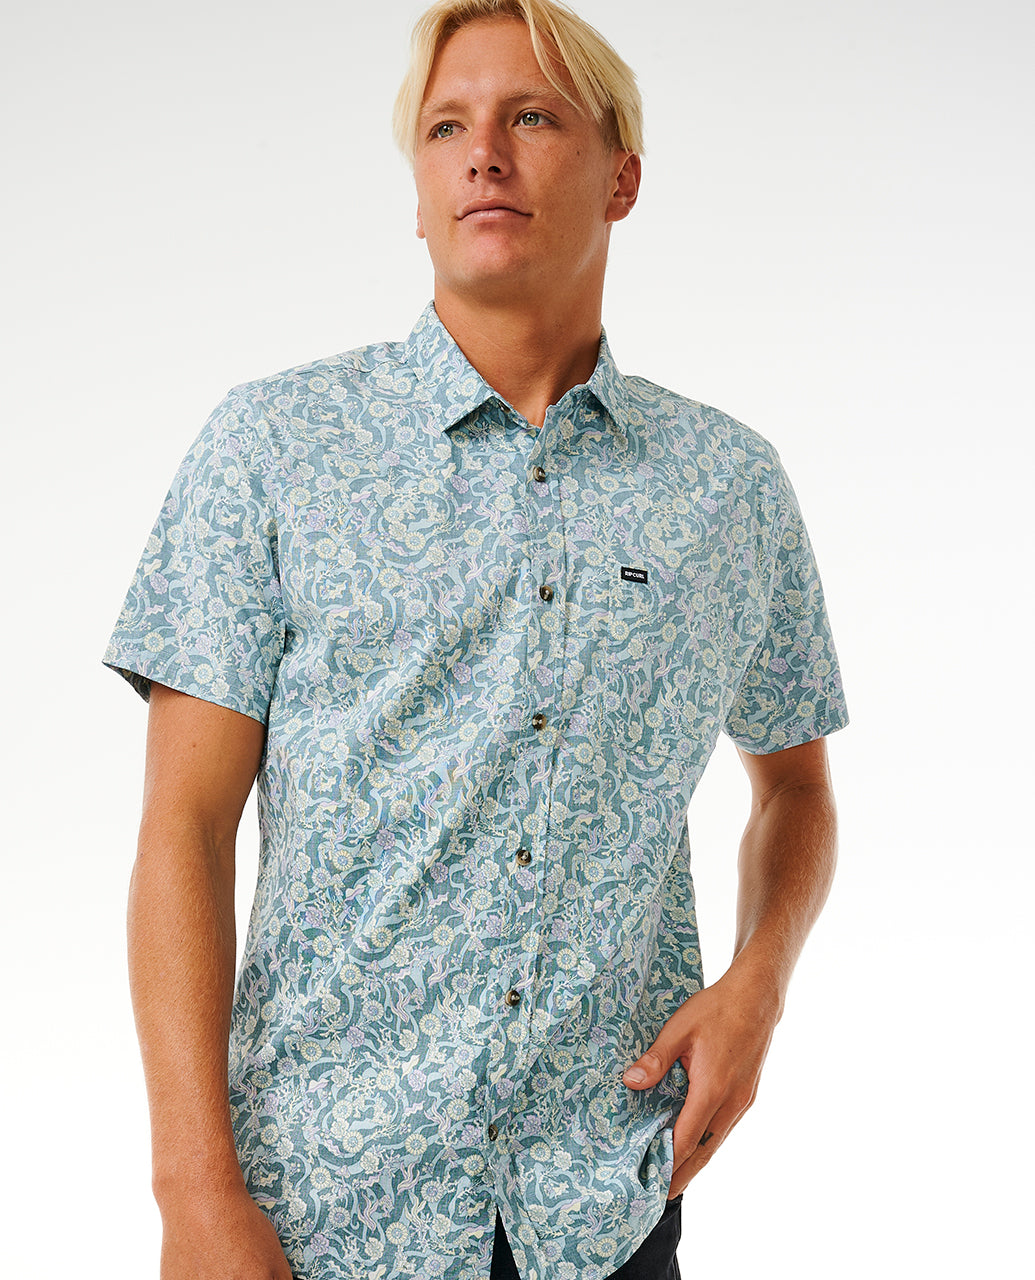 FLORAL REEF S/S SHIRT